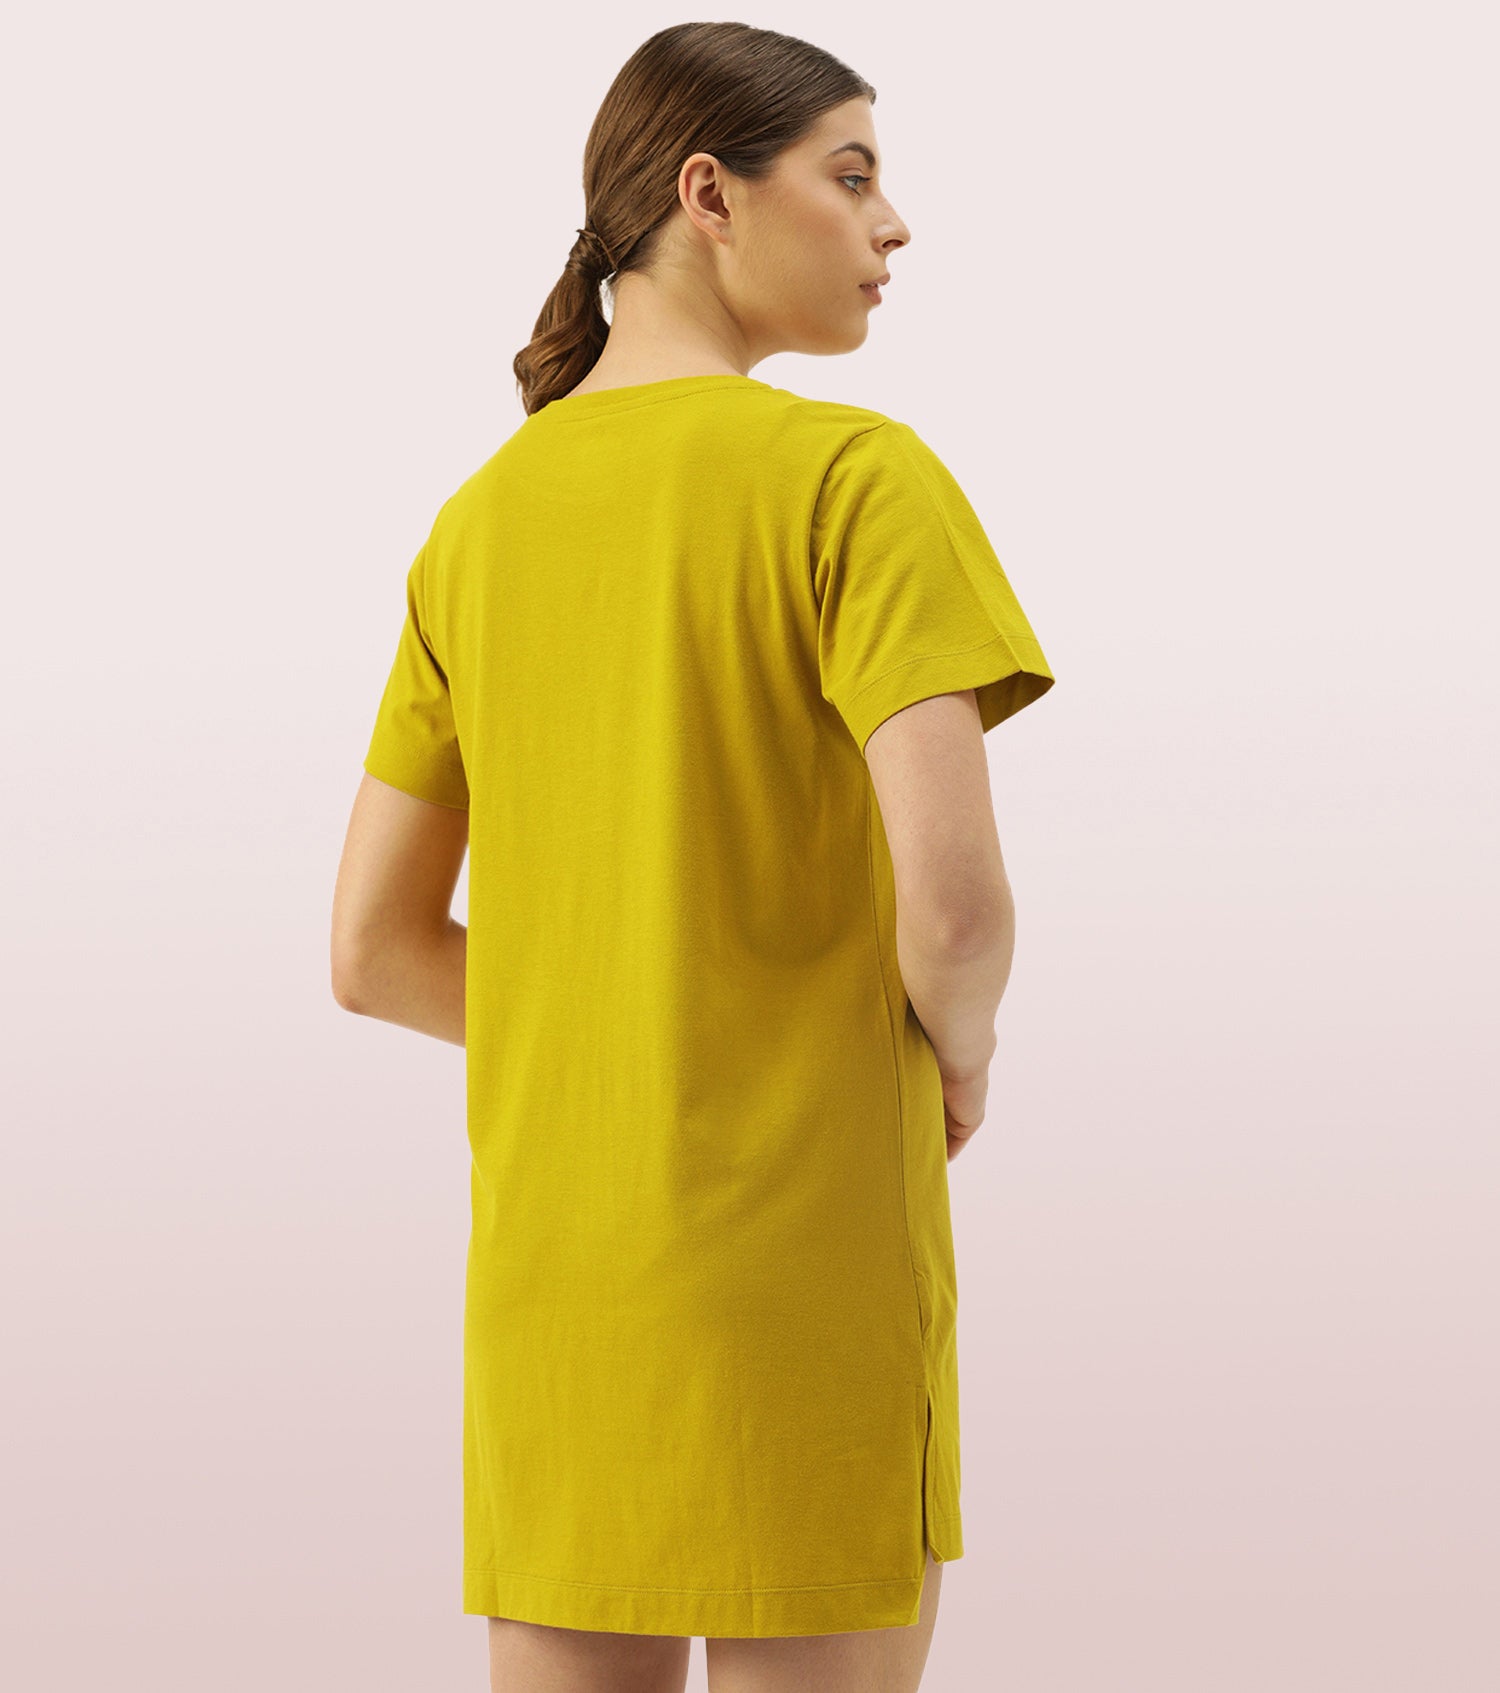 Tunic Tee – Solid | Short Sleeve Tunic Tee With Side Slit & Mindful Graphic